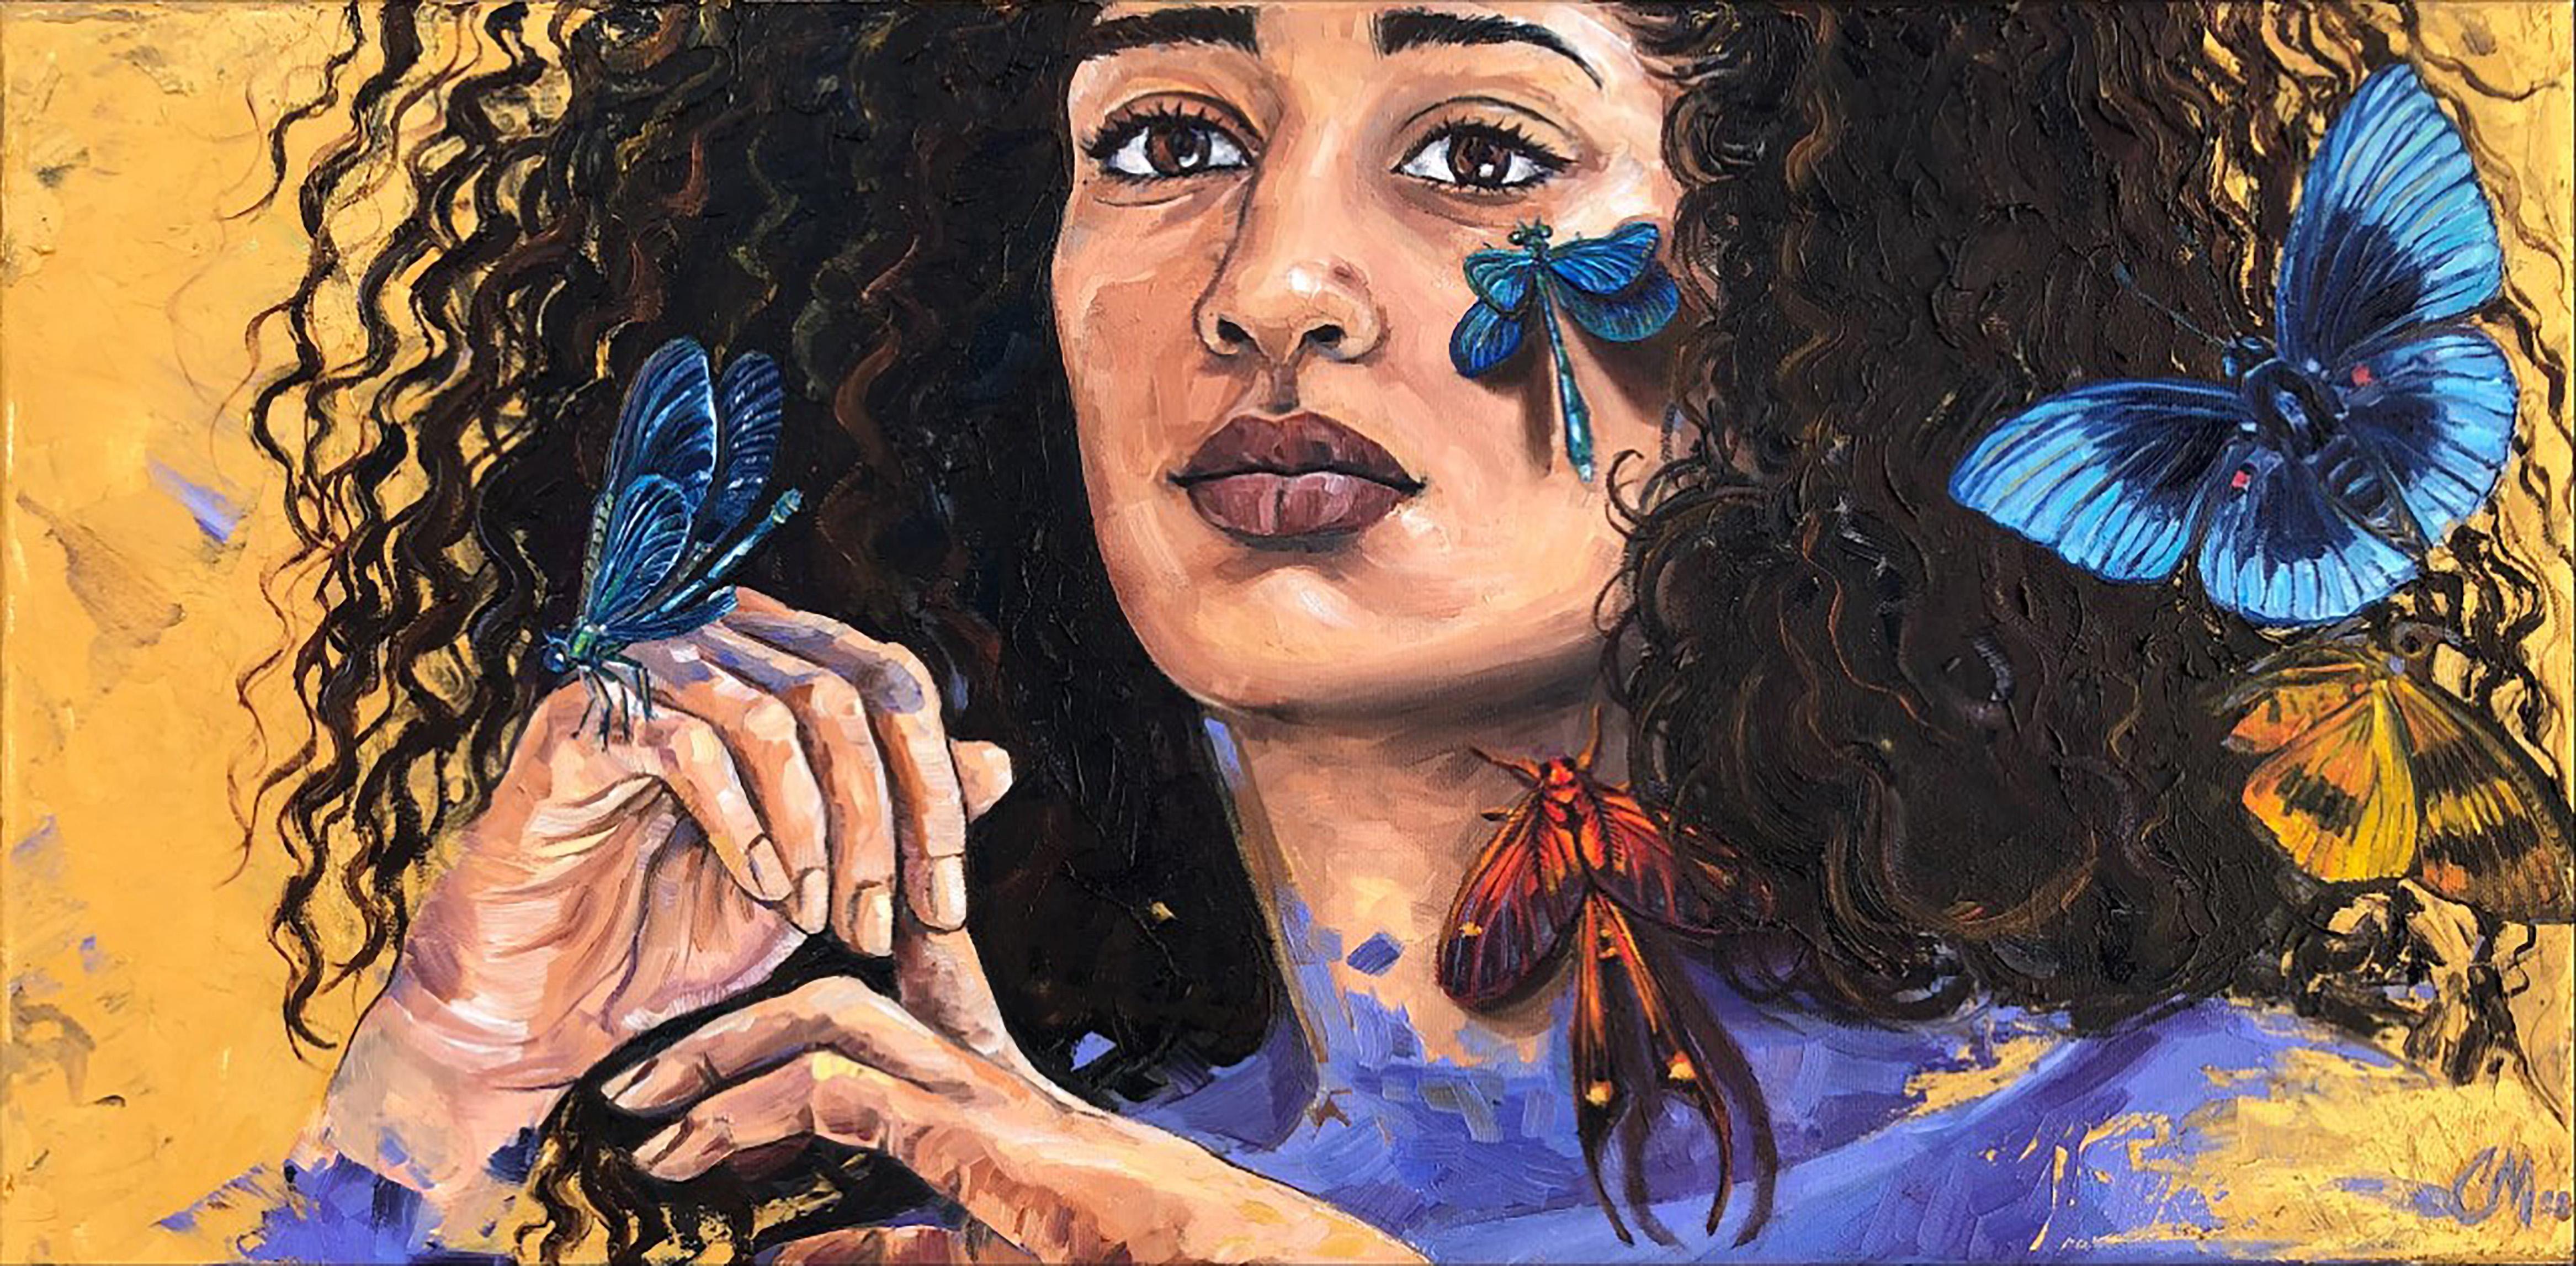 Charlene Mosley Animal Painting - Realism Portrait with Butterflies, "In Deep Thought"